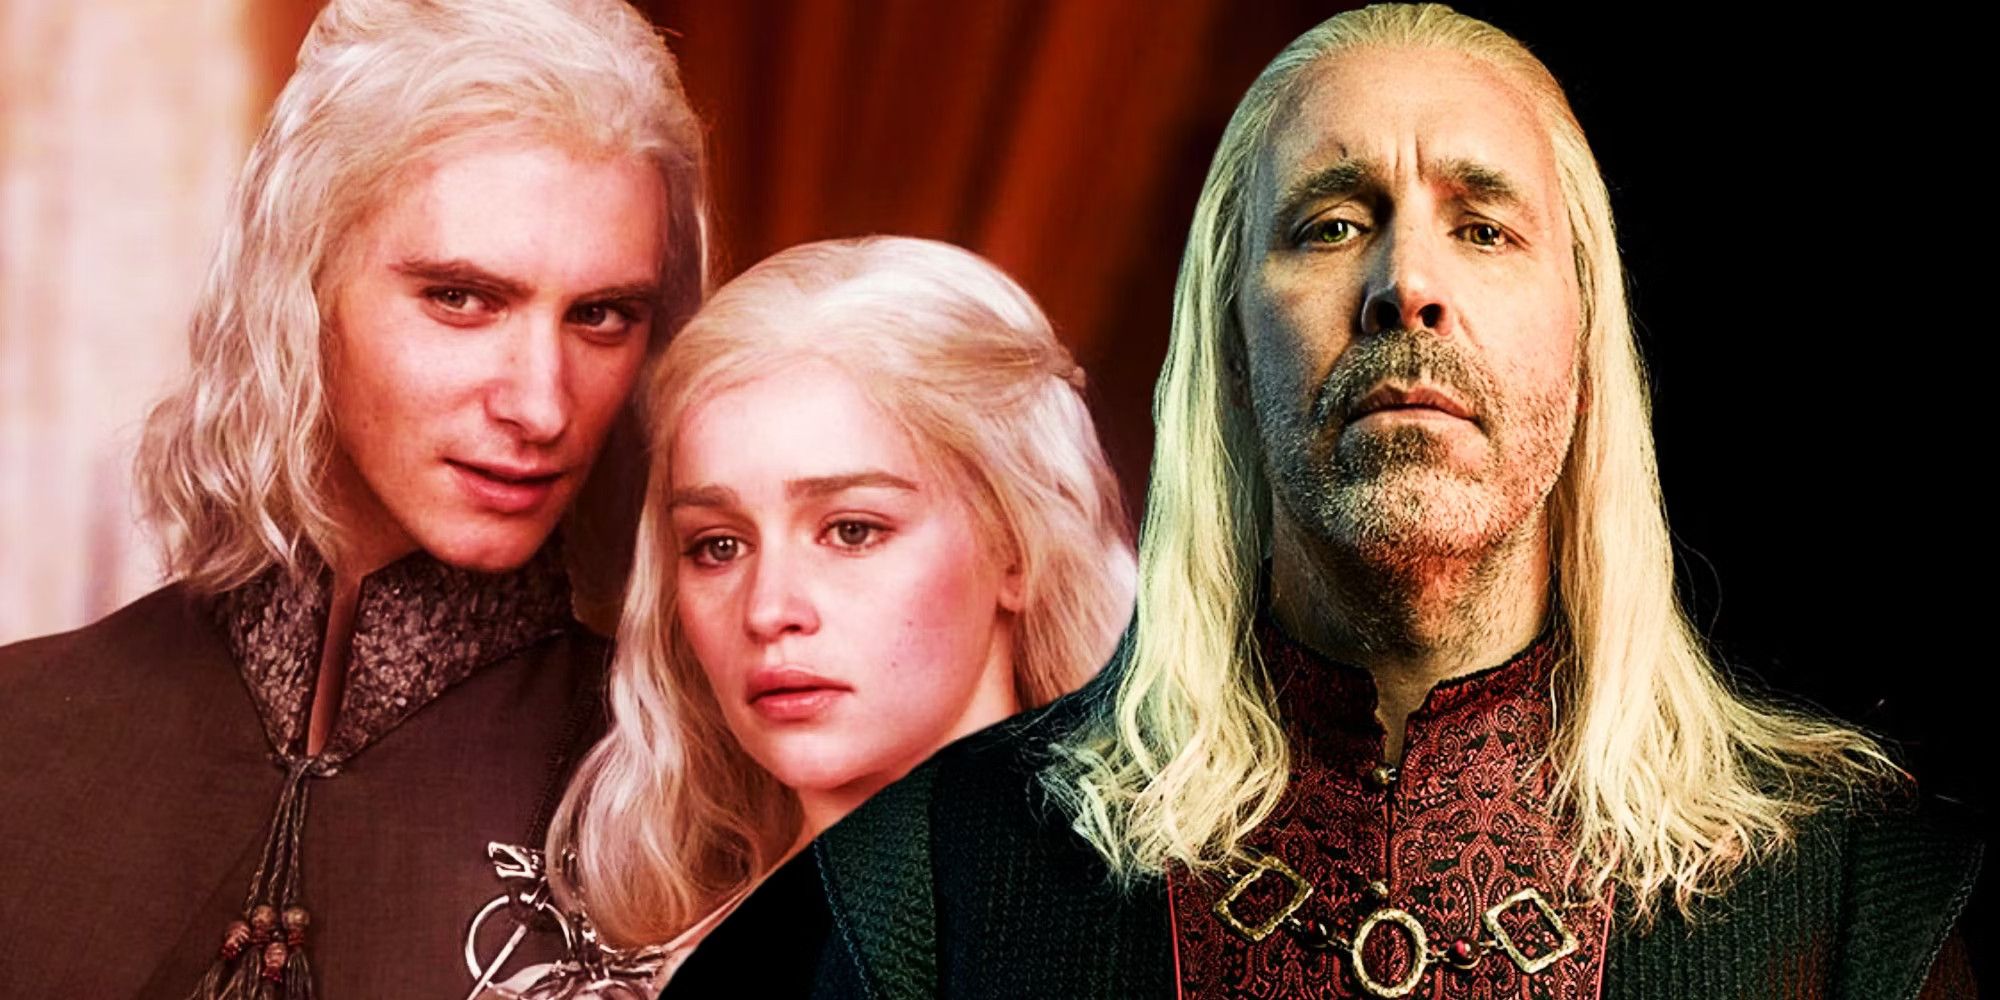 Viserys and Daenerys from Game of Thrones with Viserys from House of the Dragon